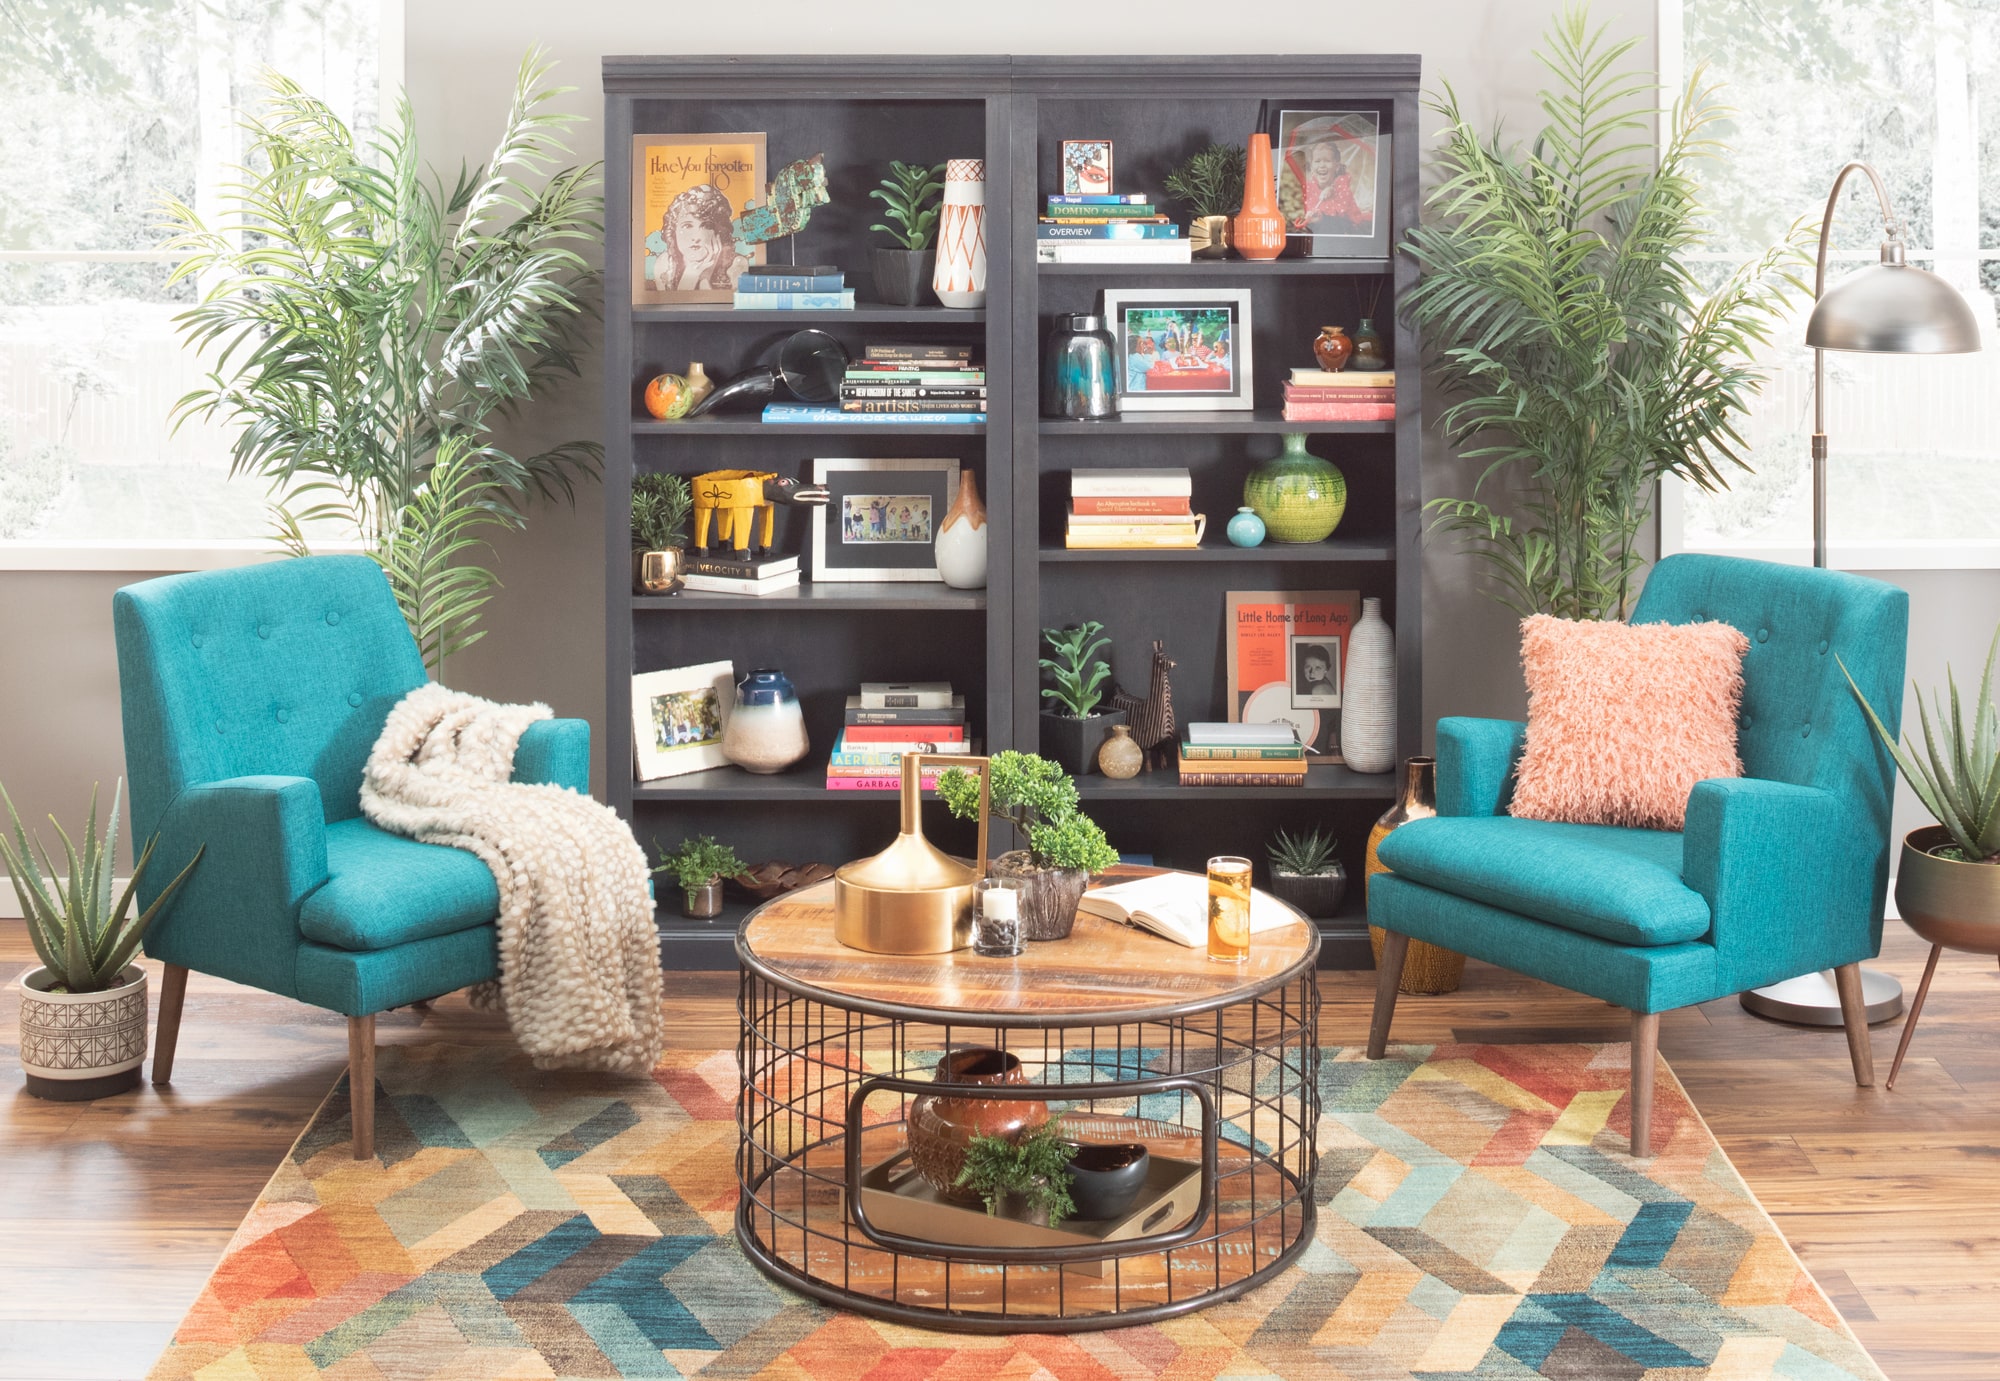 Eclectic one-of-a-kind reading nook